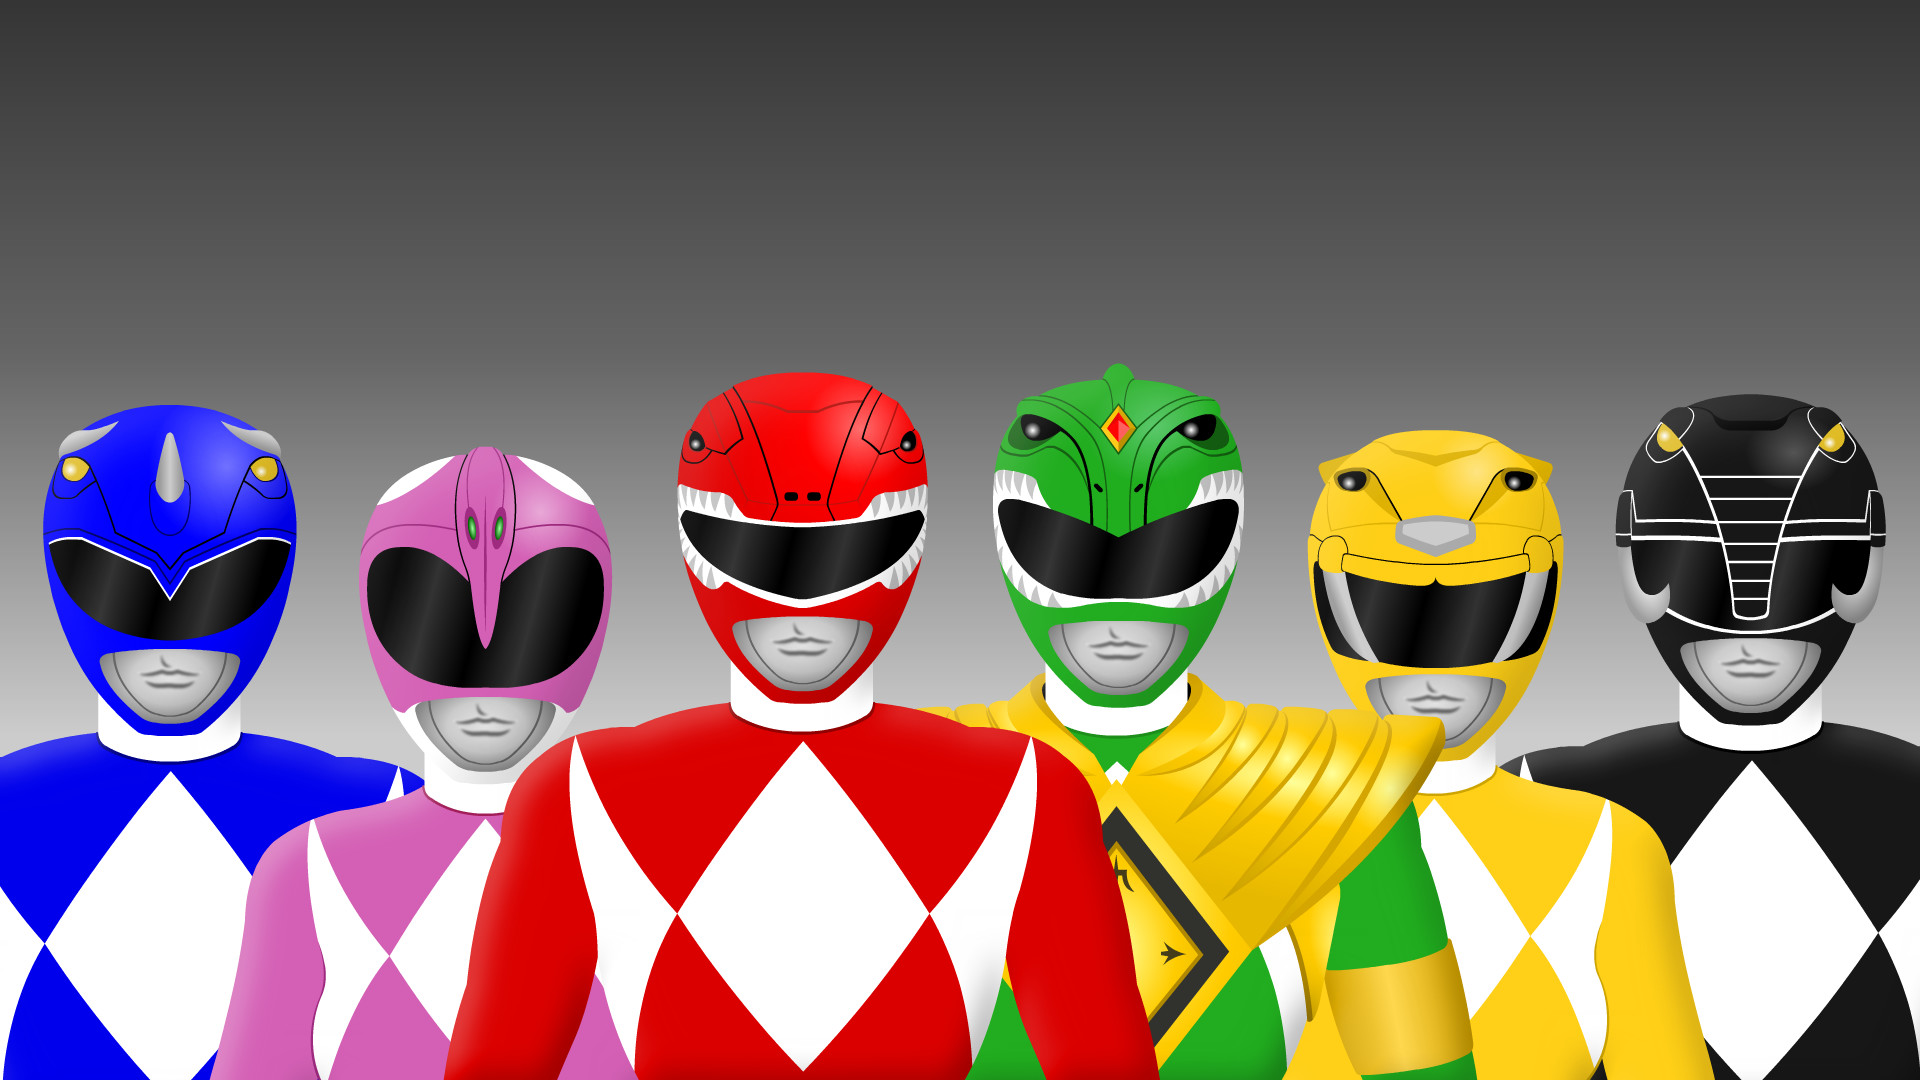 Power Rangers Wallpaper For IPhone 64 images